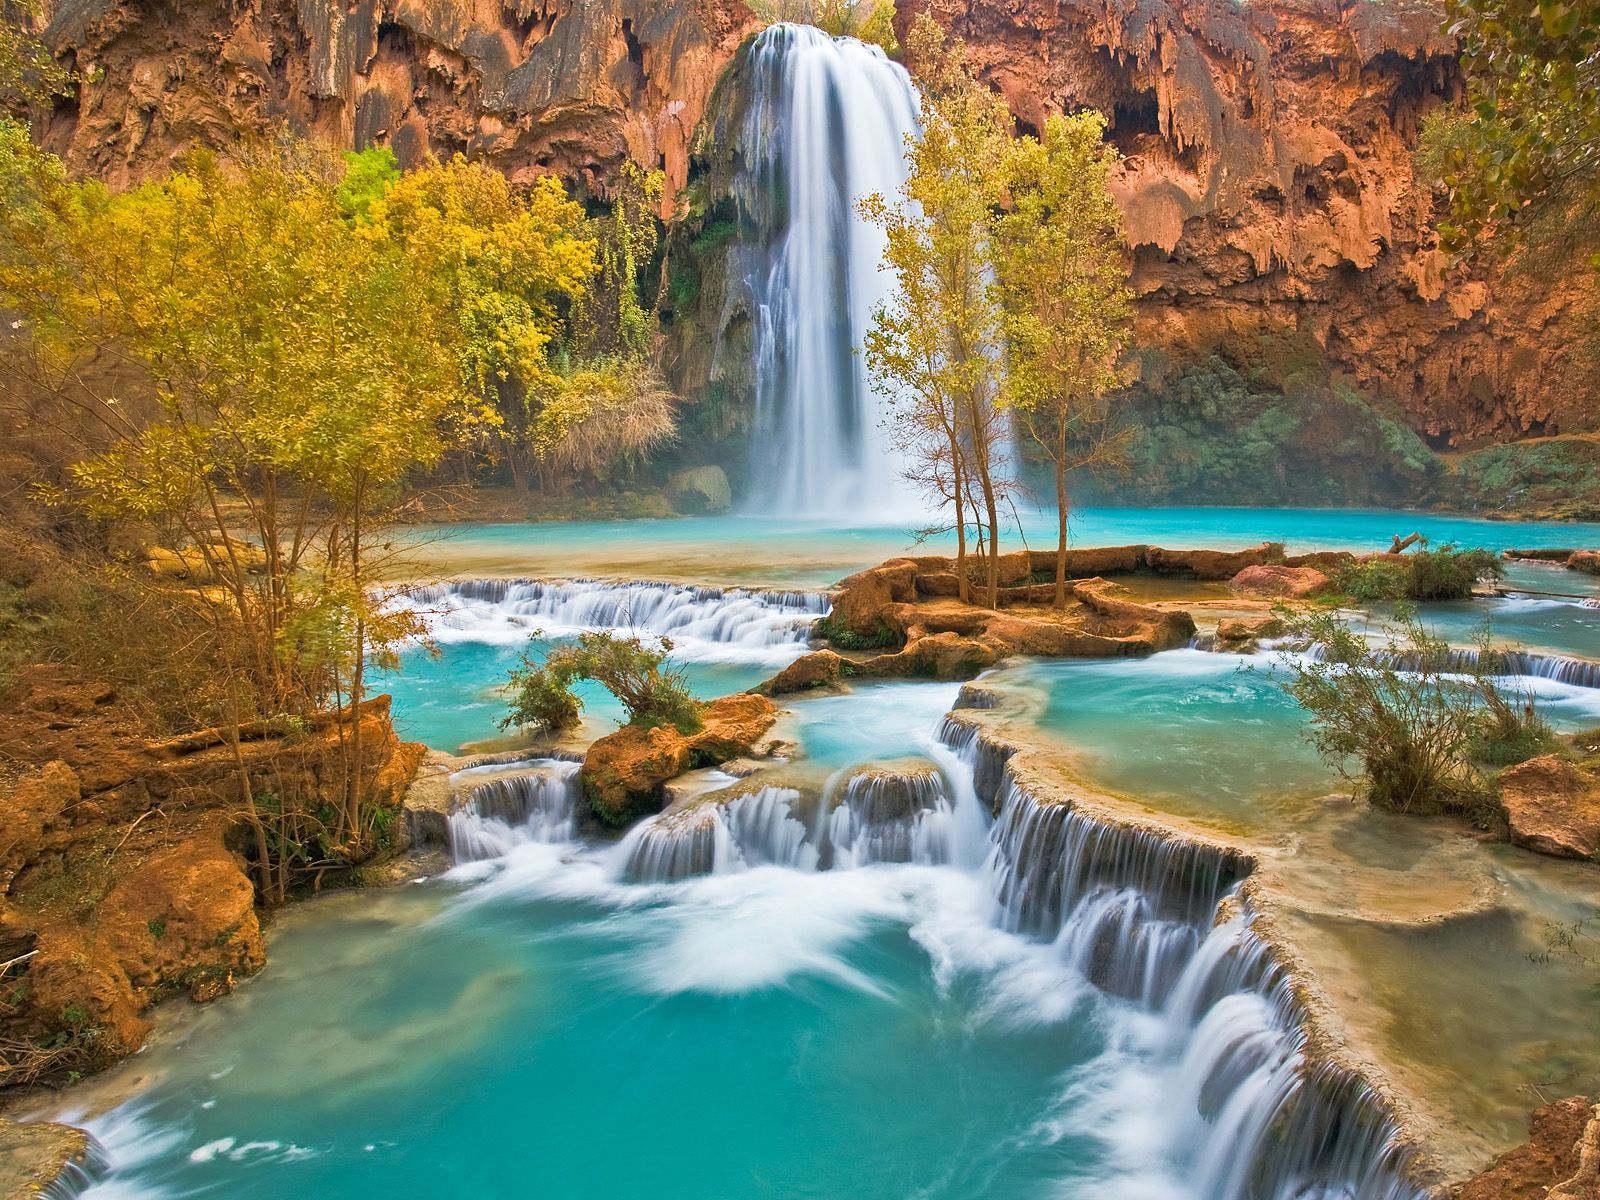 Havasu Falls is known throughout the world and has appeared